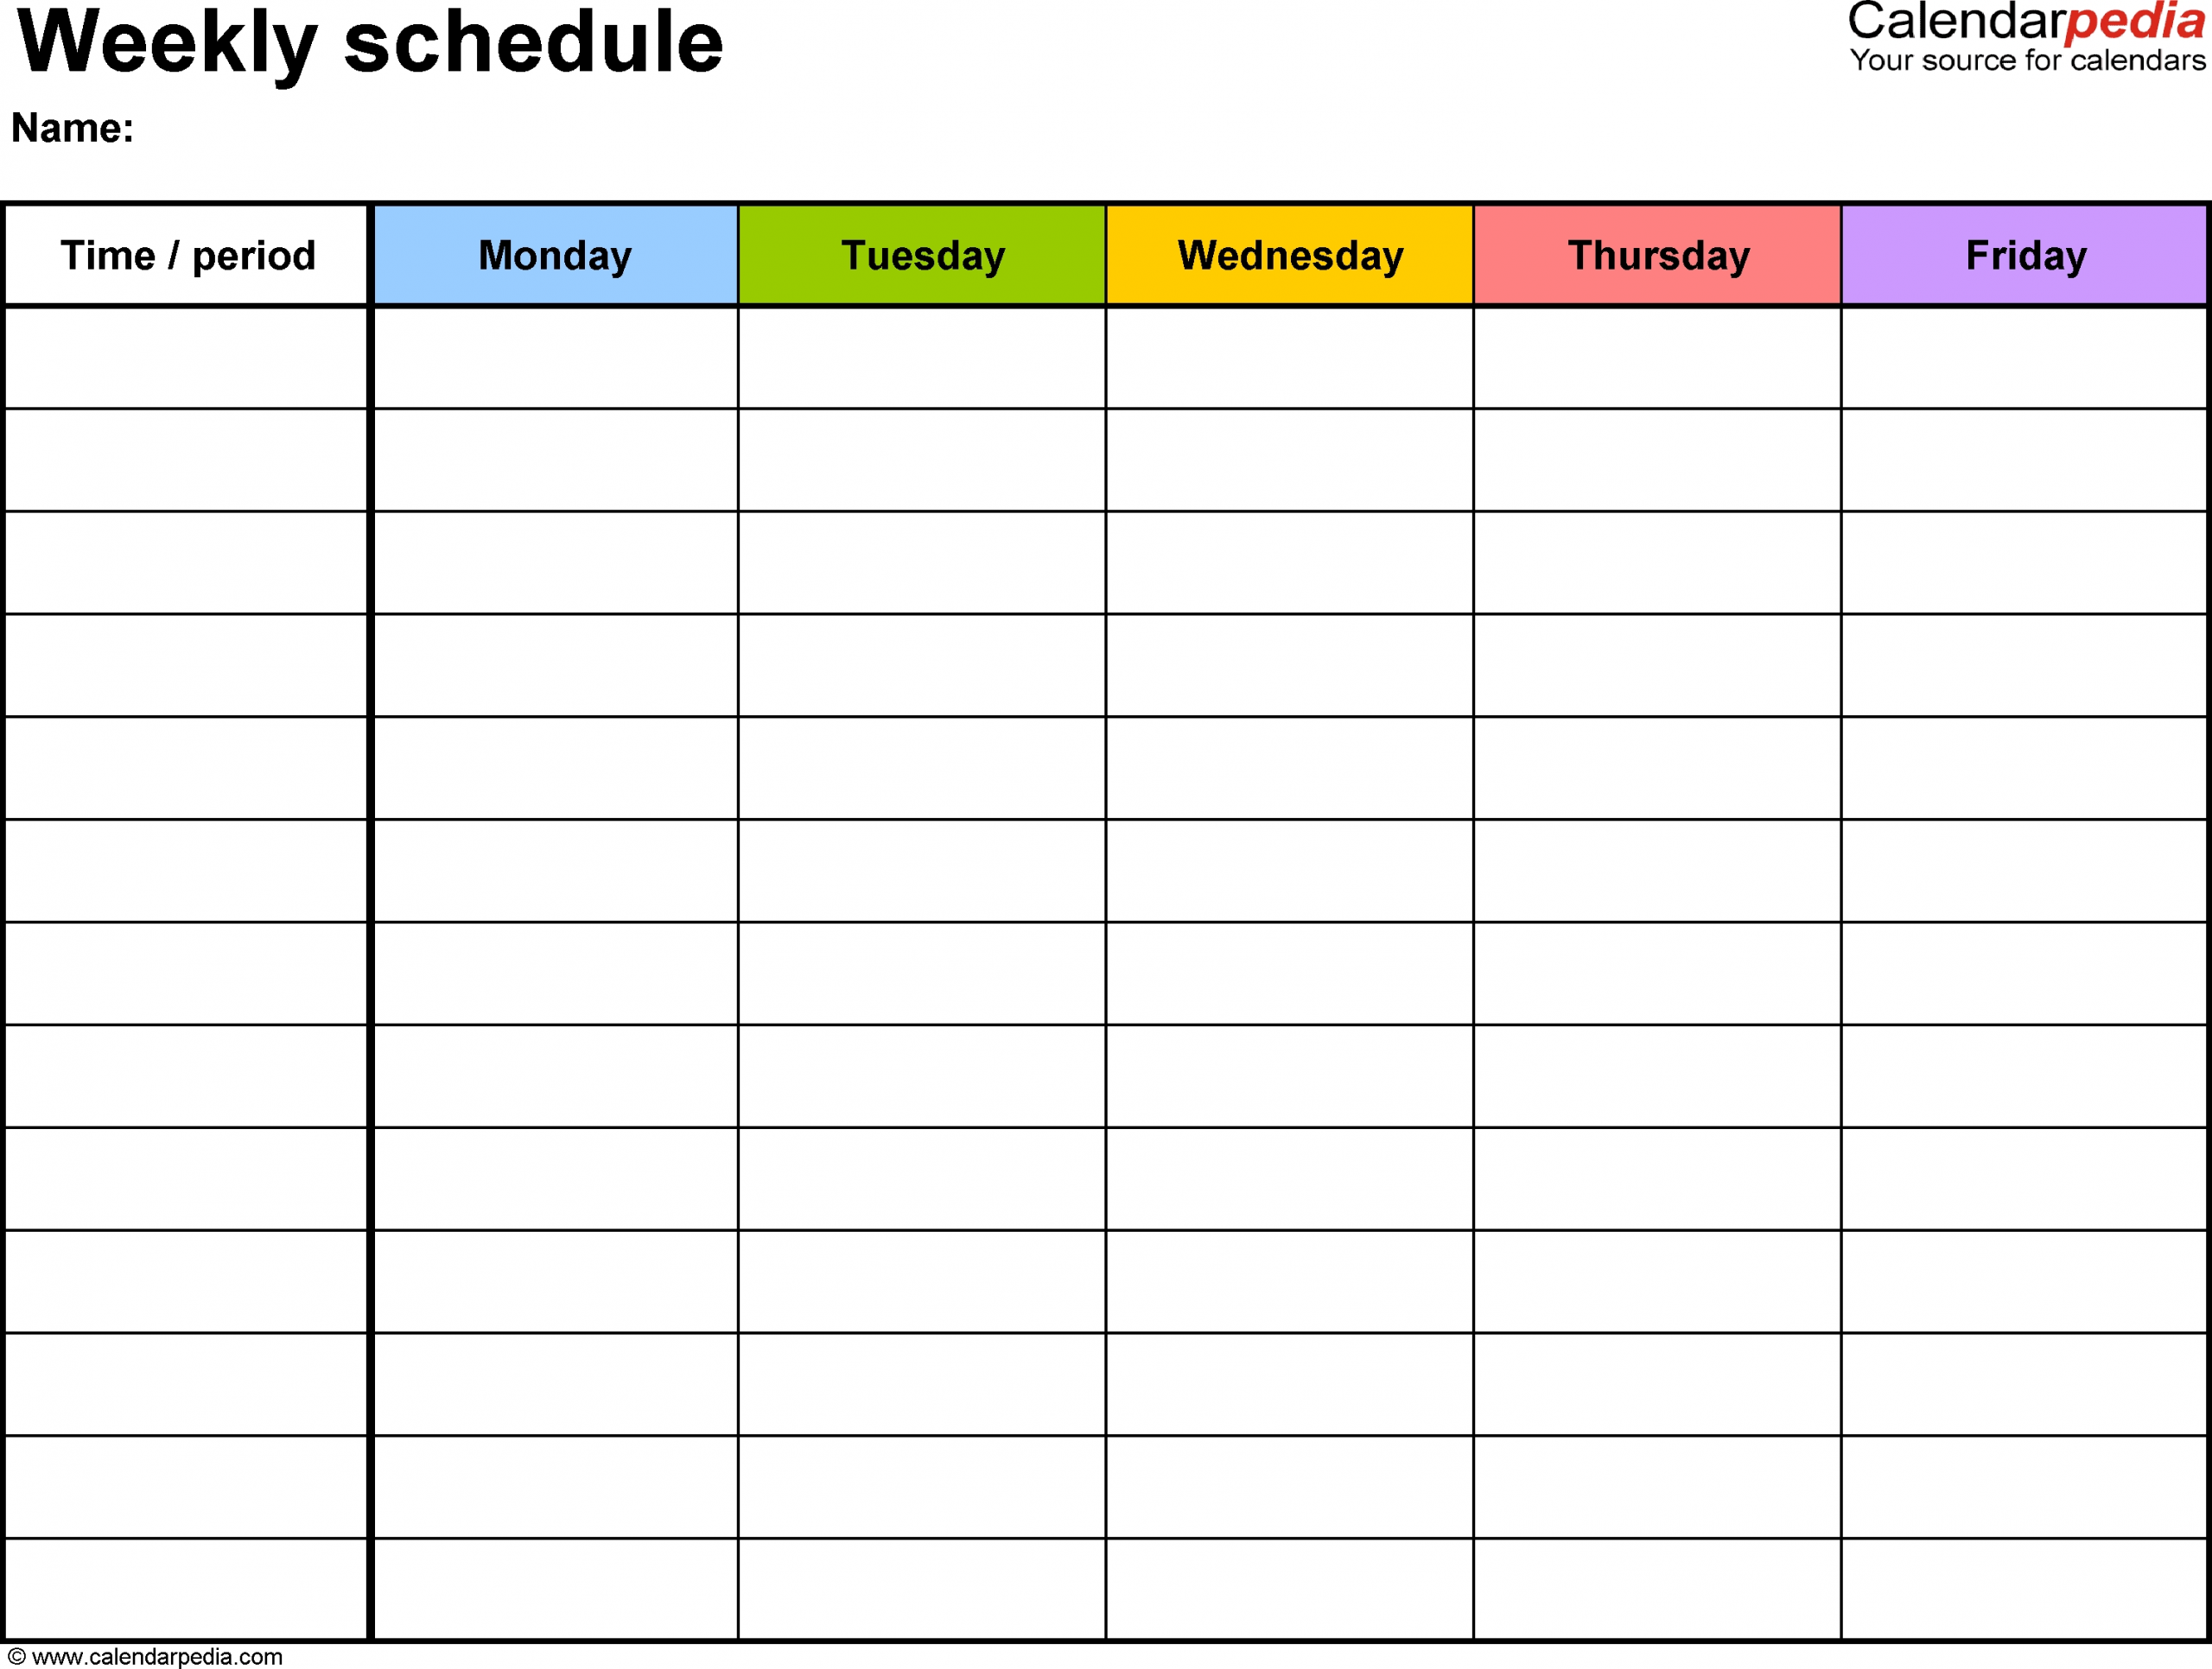 Free Weekly Schedule Templates For Word - 18 Templates in 5 Day Weekly Planner Template